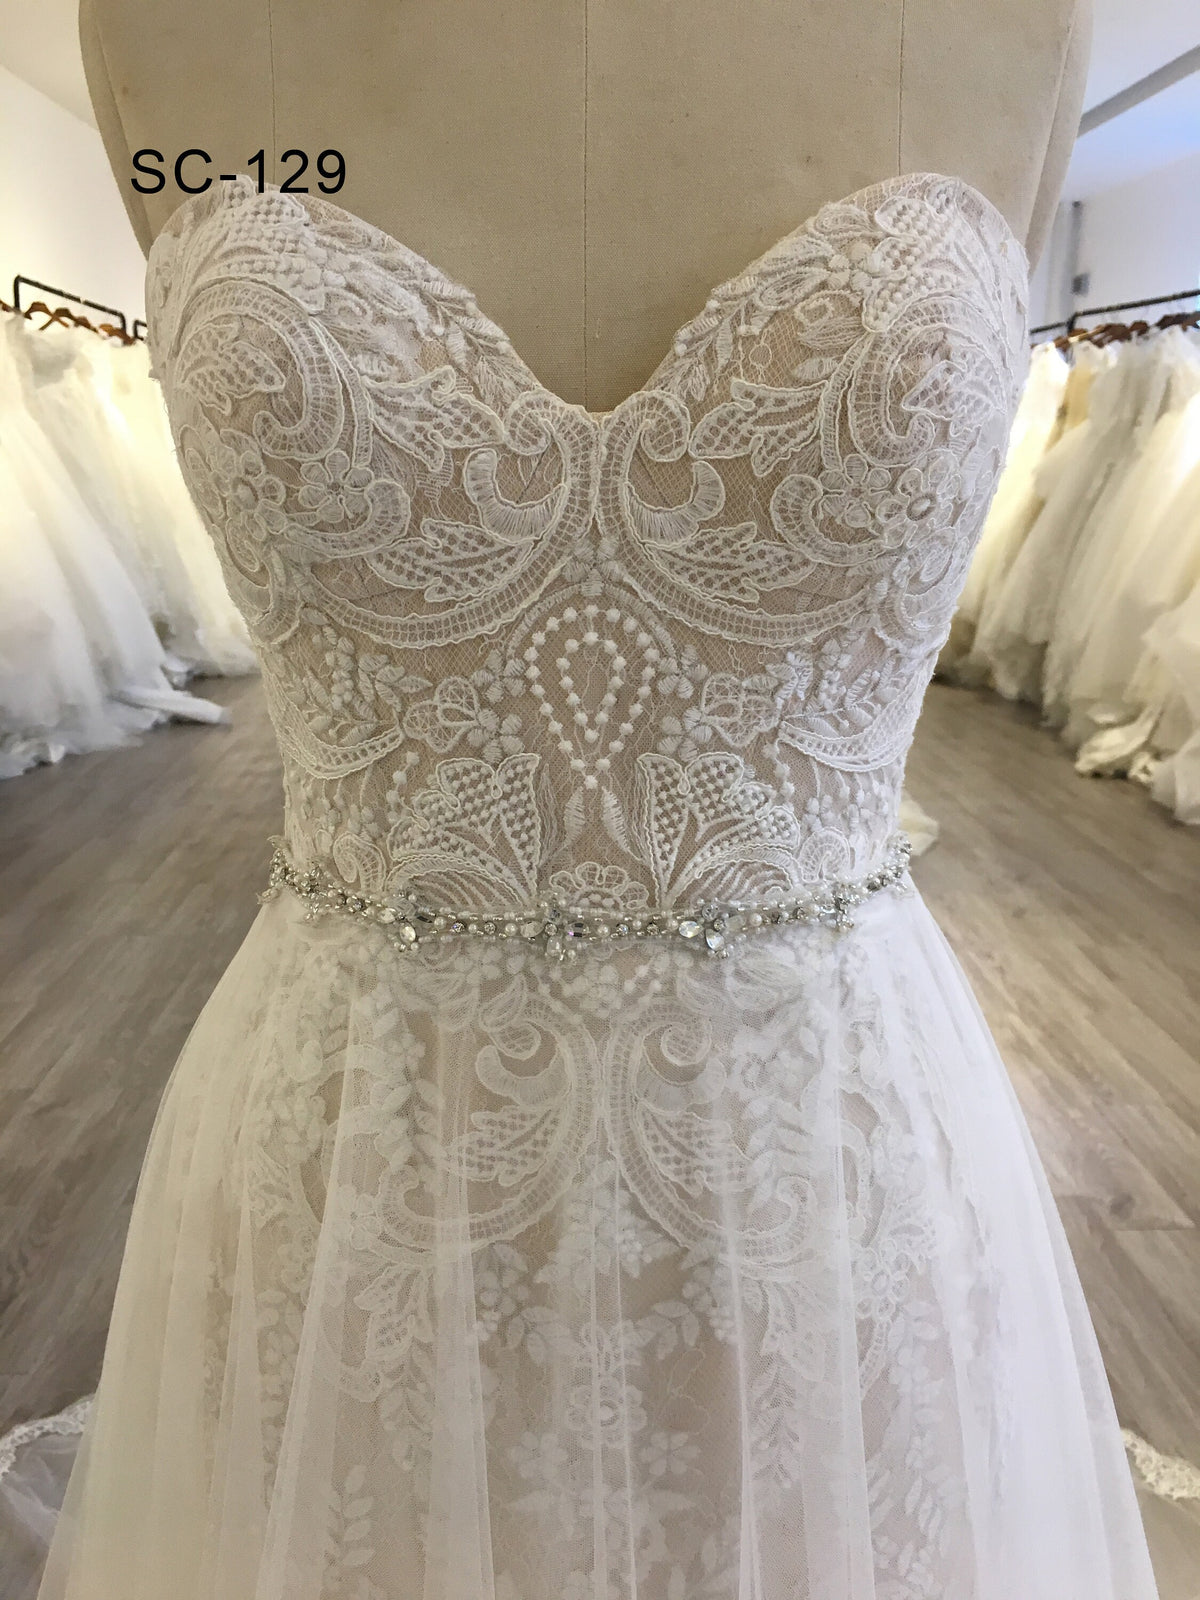 Beautiful Lace Mermaid Wedding Dress with Reovable ALine Skirt Train Bridal Gown Sleeveless Strapless Sweetheart Neckline Open Back